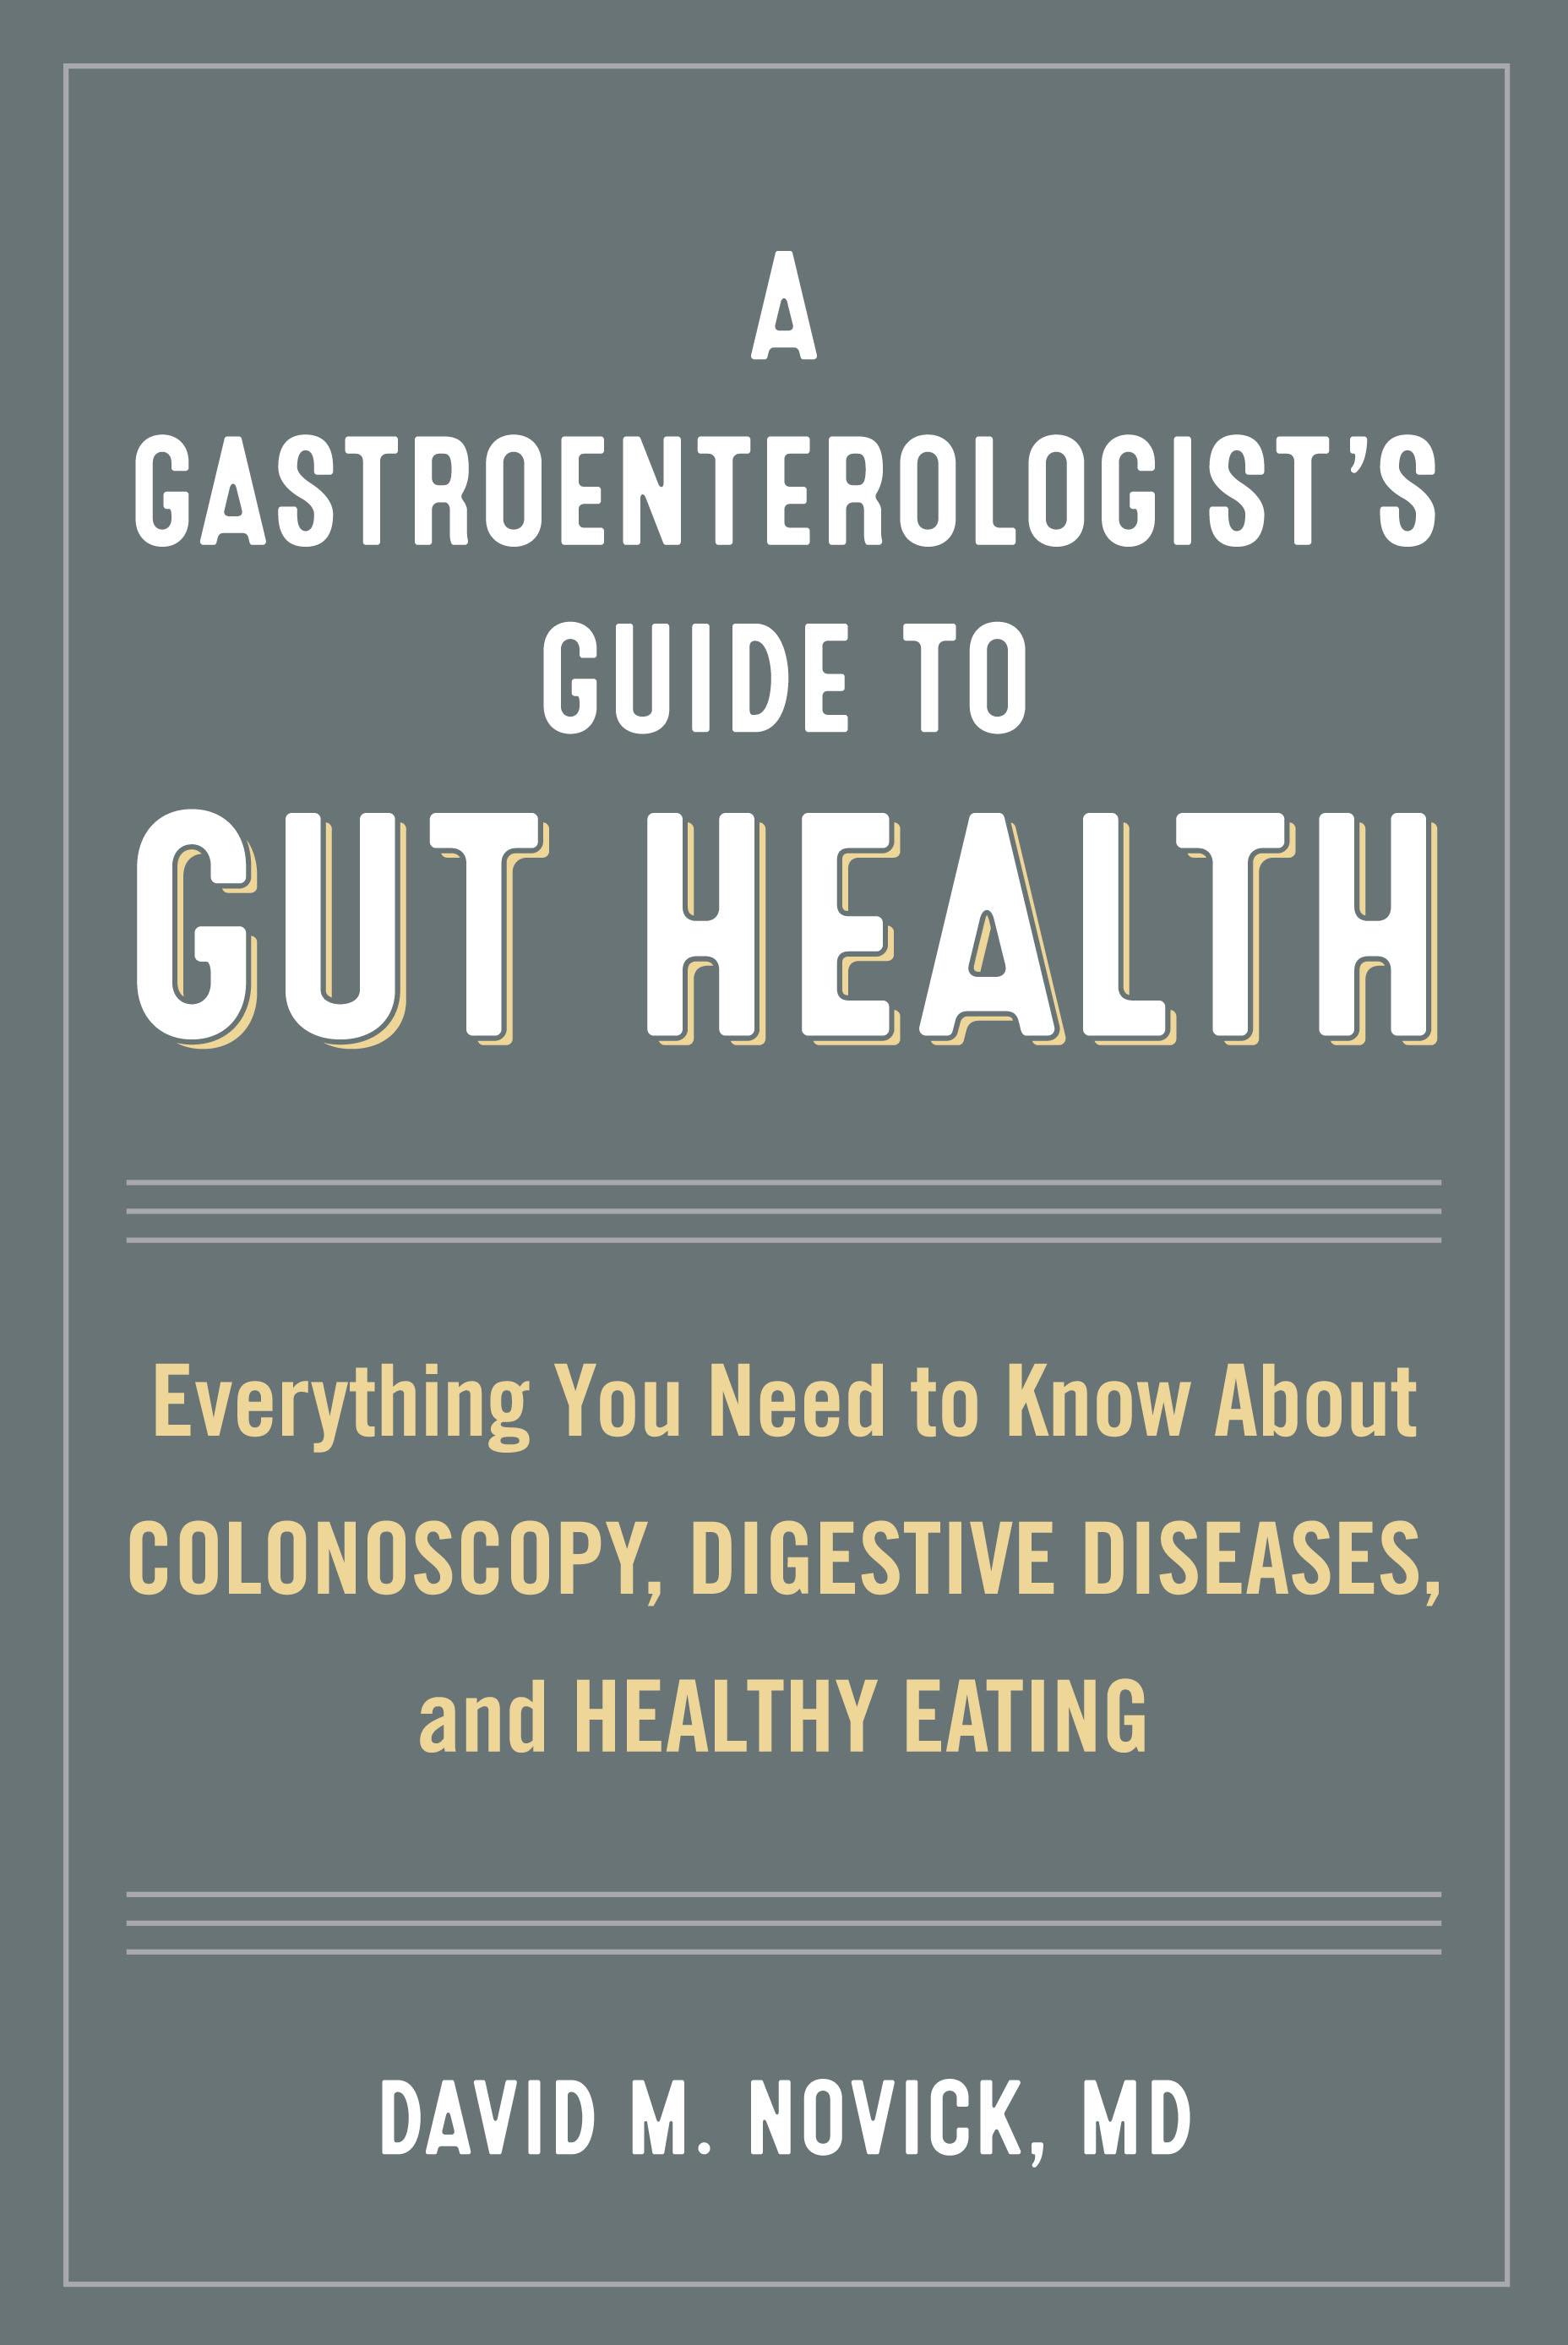 Everything You Need to Know About Colonoscopy, Digestive Diseases, and Healthy Eating